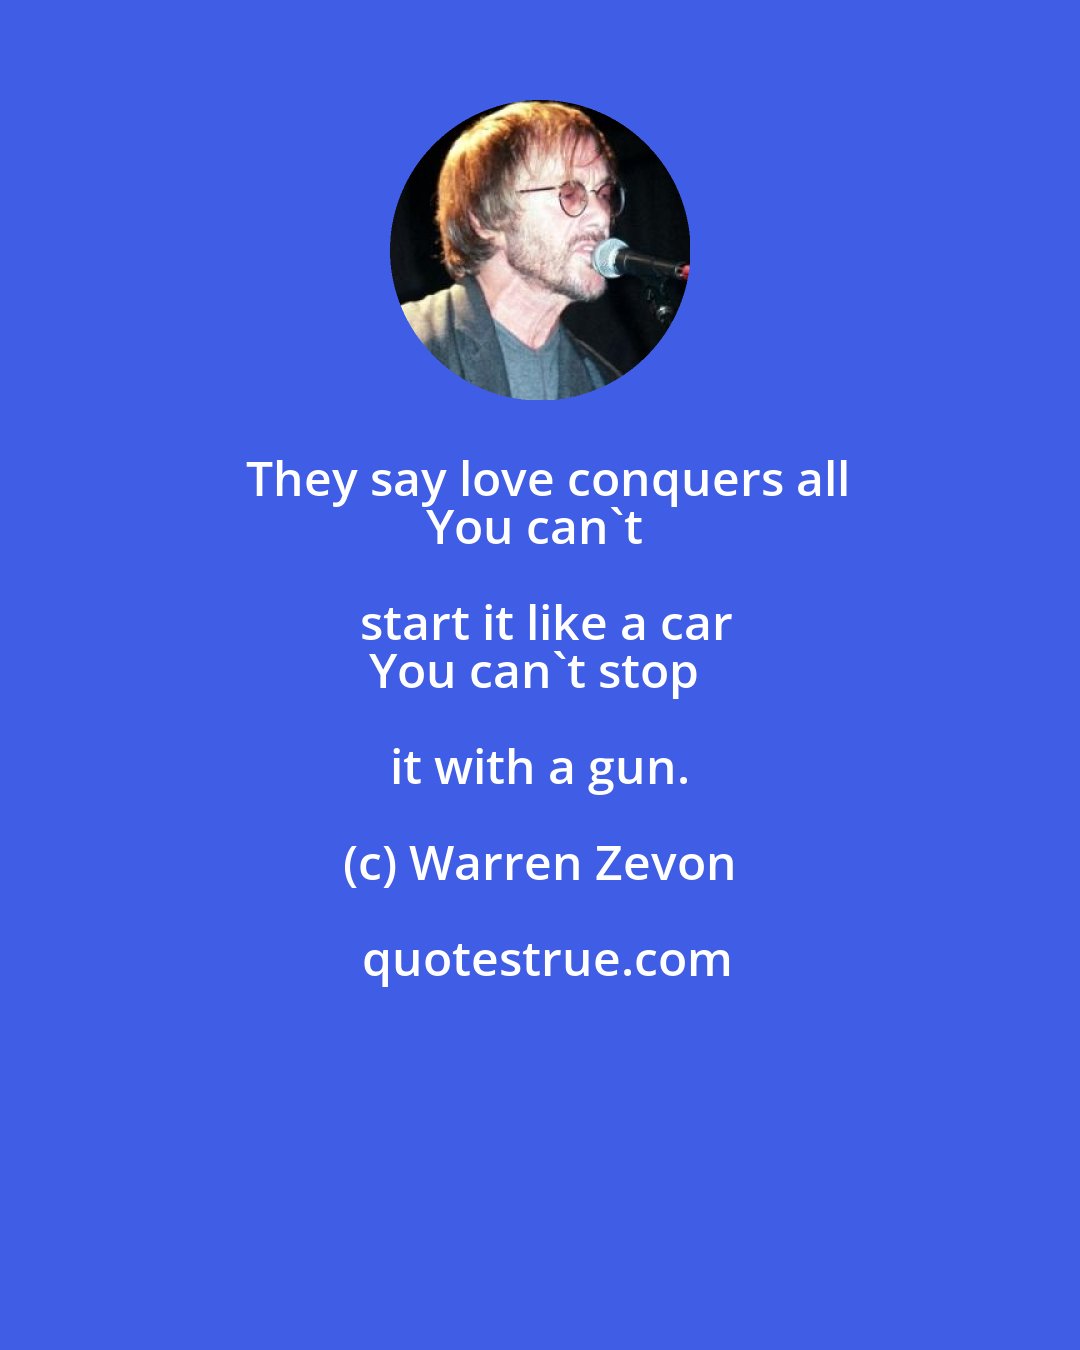 Warren Zevon: They say love conquers all
You can't start it like a car
You can't stop it with a gun.